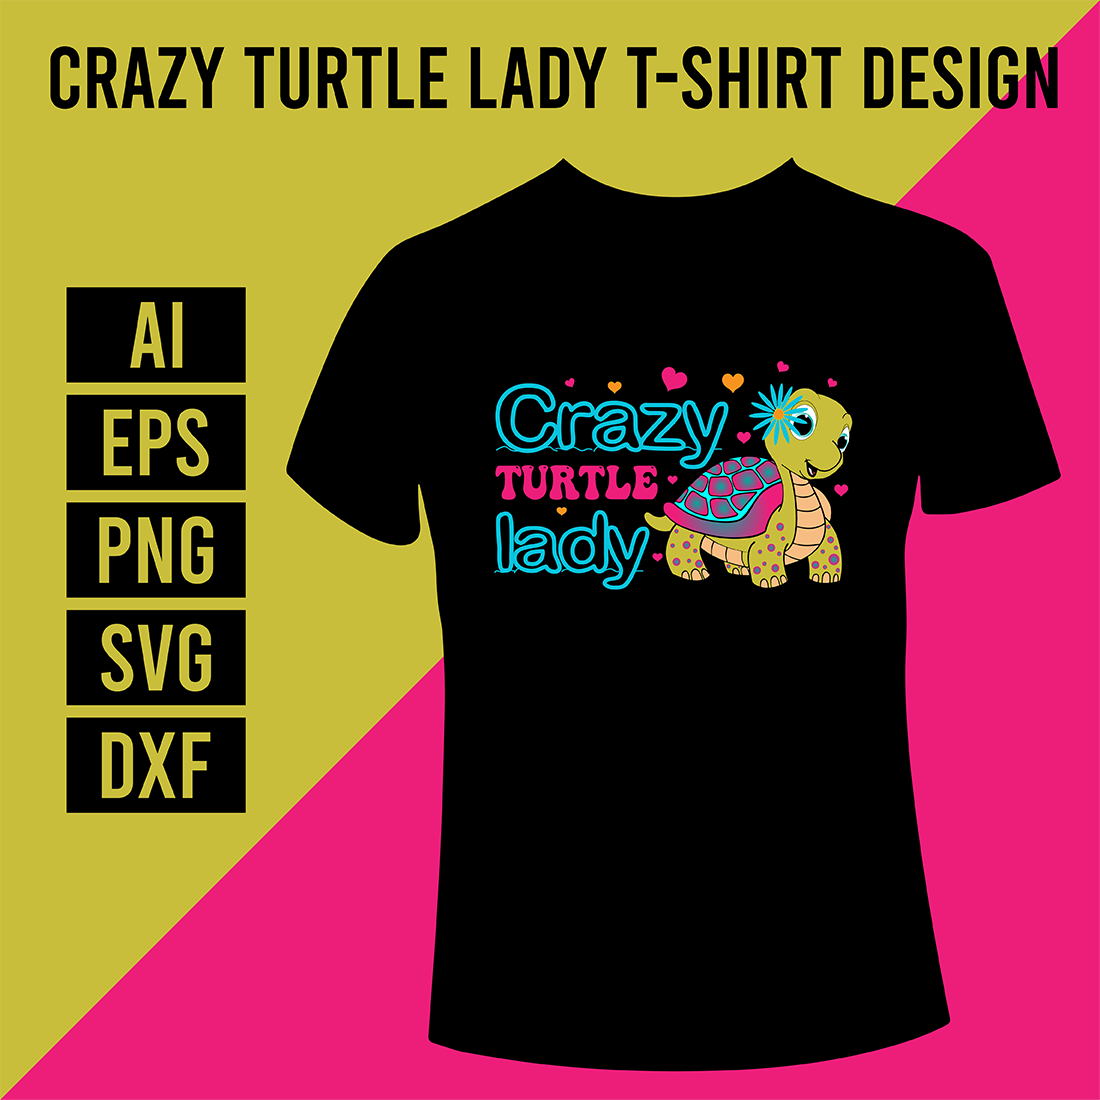 Crazy Turtle Lady T-Shirt Design cover image.